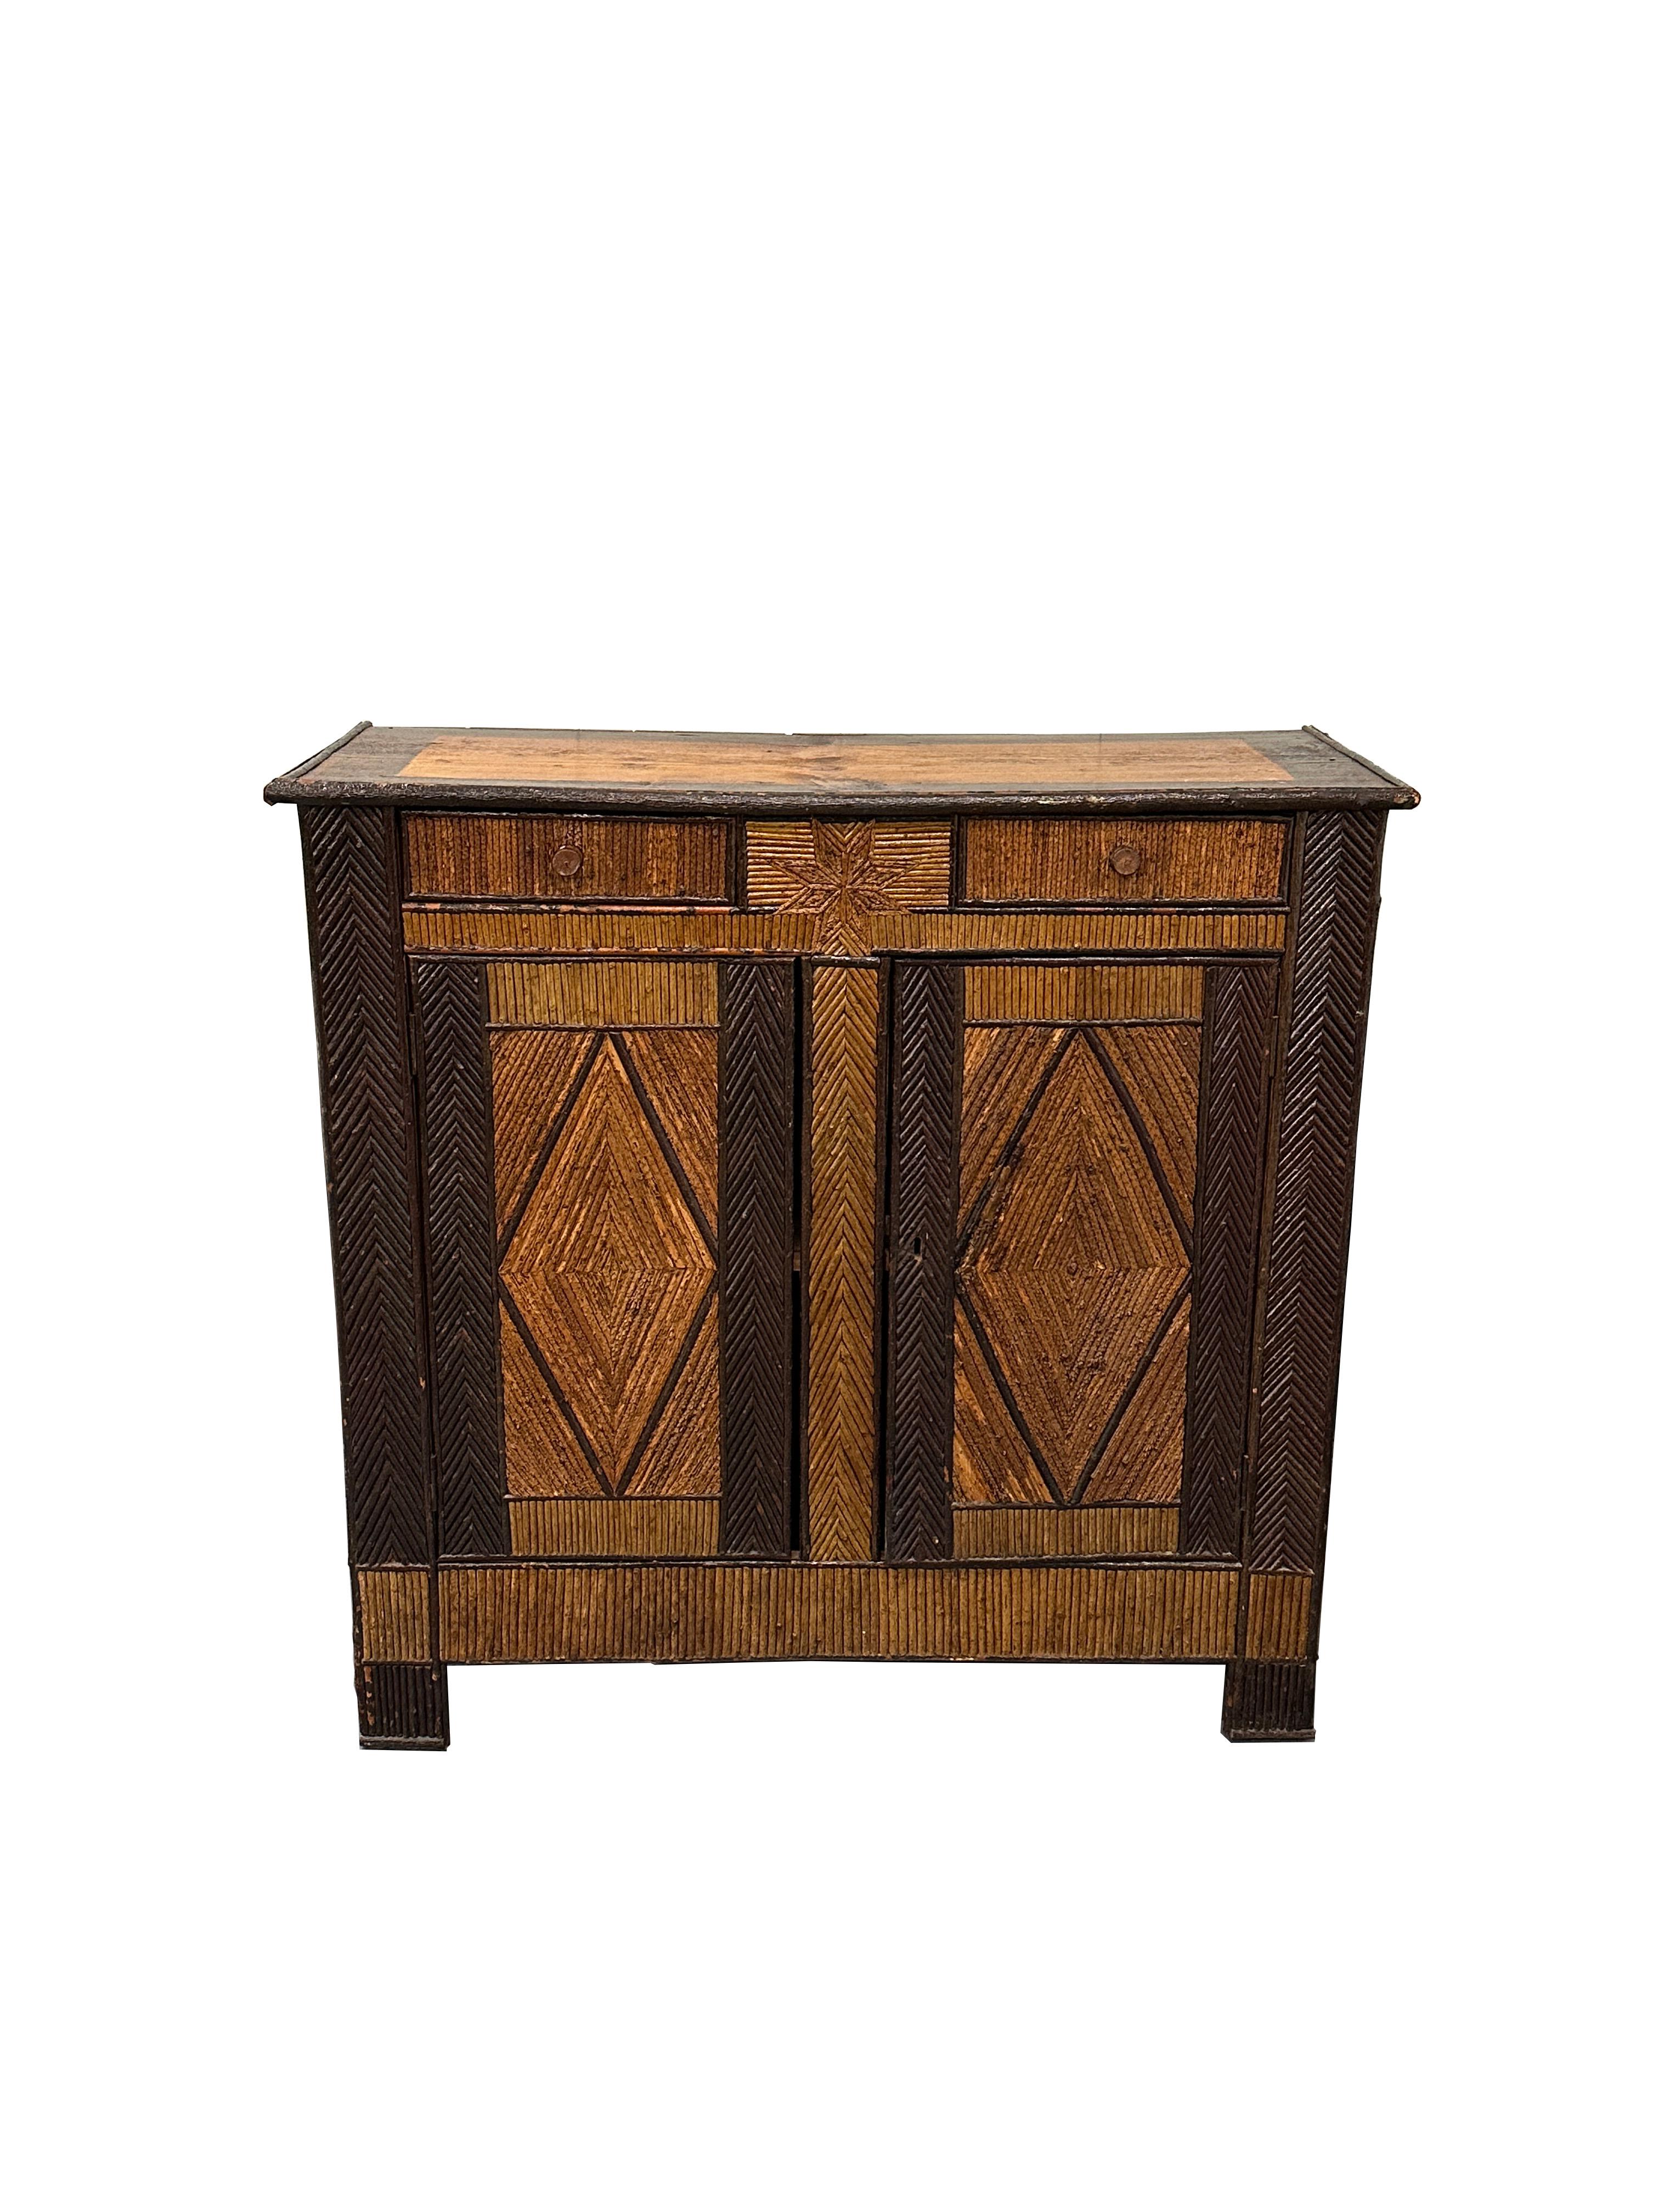 A transitional piece with character and sophistication. Very good condition. Slight ware commensurate with age. The hazel wood is both stained and varnished in two different tones. The filets of wood are assembled into a pattern on the face of the